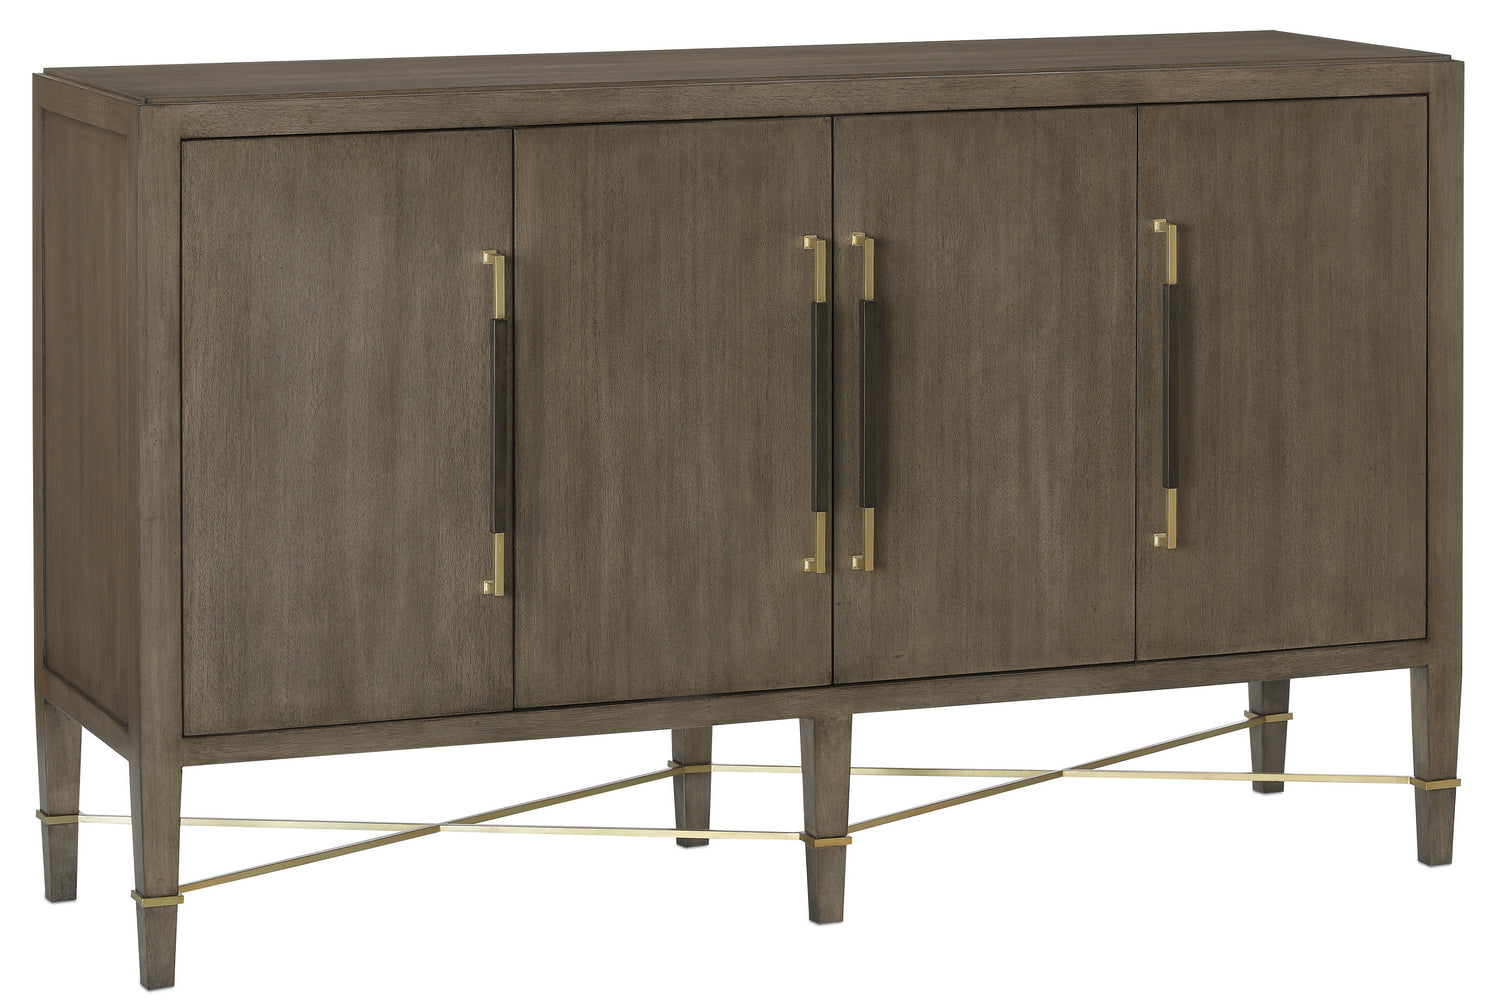 Currey and Company - Sideboard - Verona - Chanterelle/Coffee/Champagne- Union Lighting Luminaires Decor